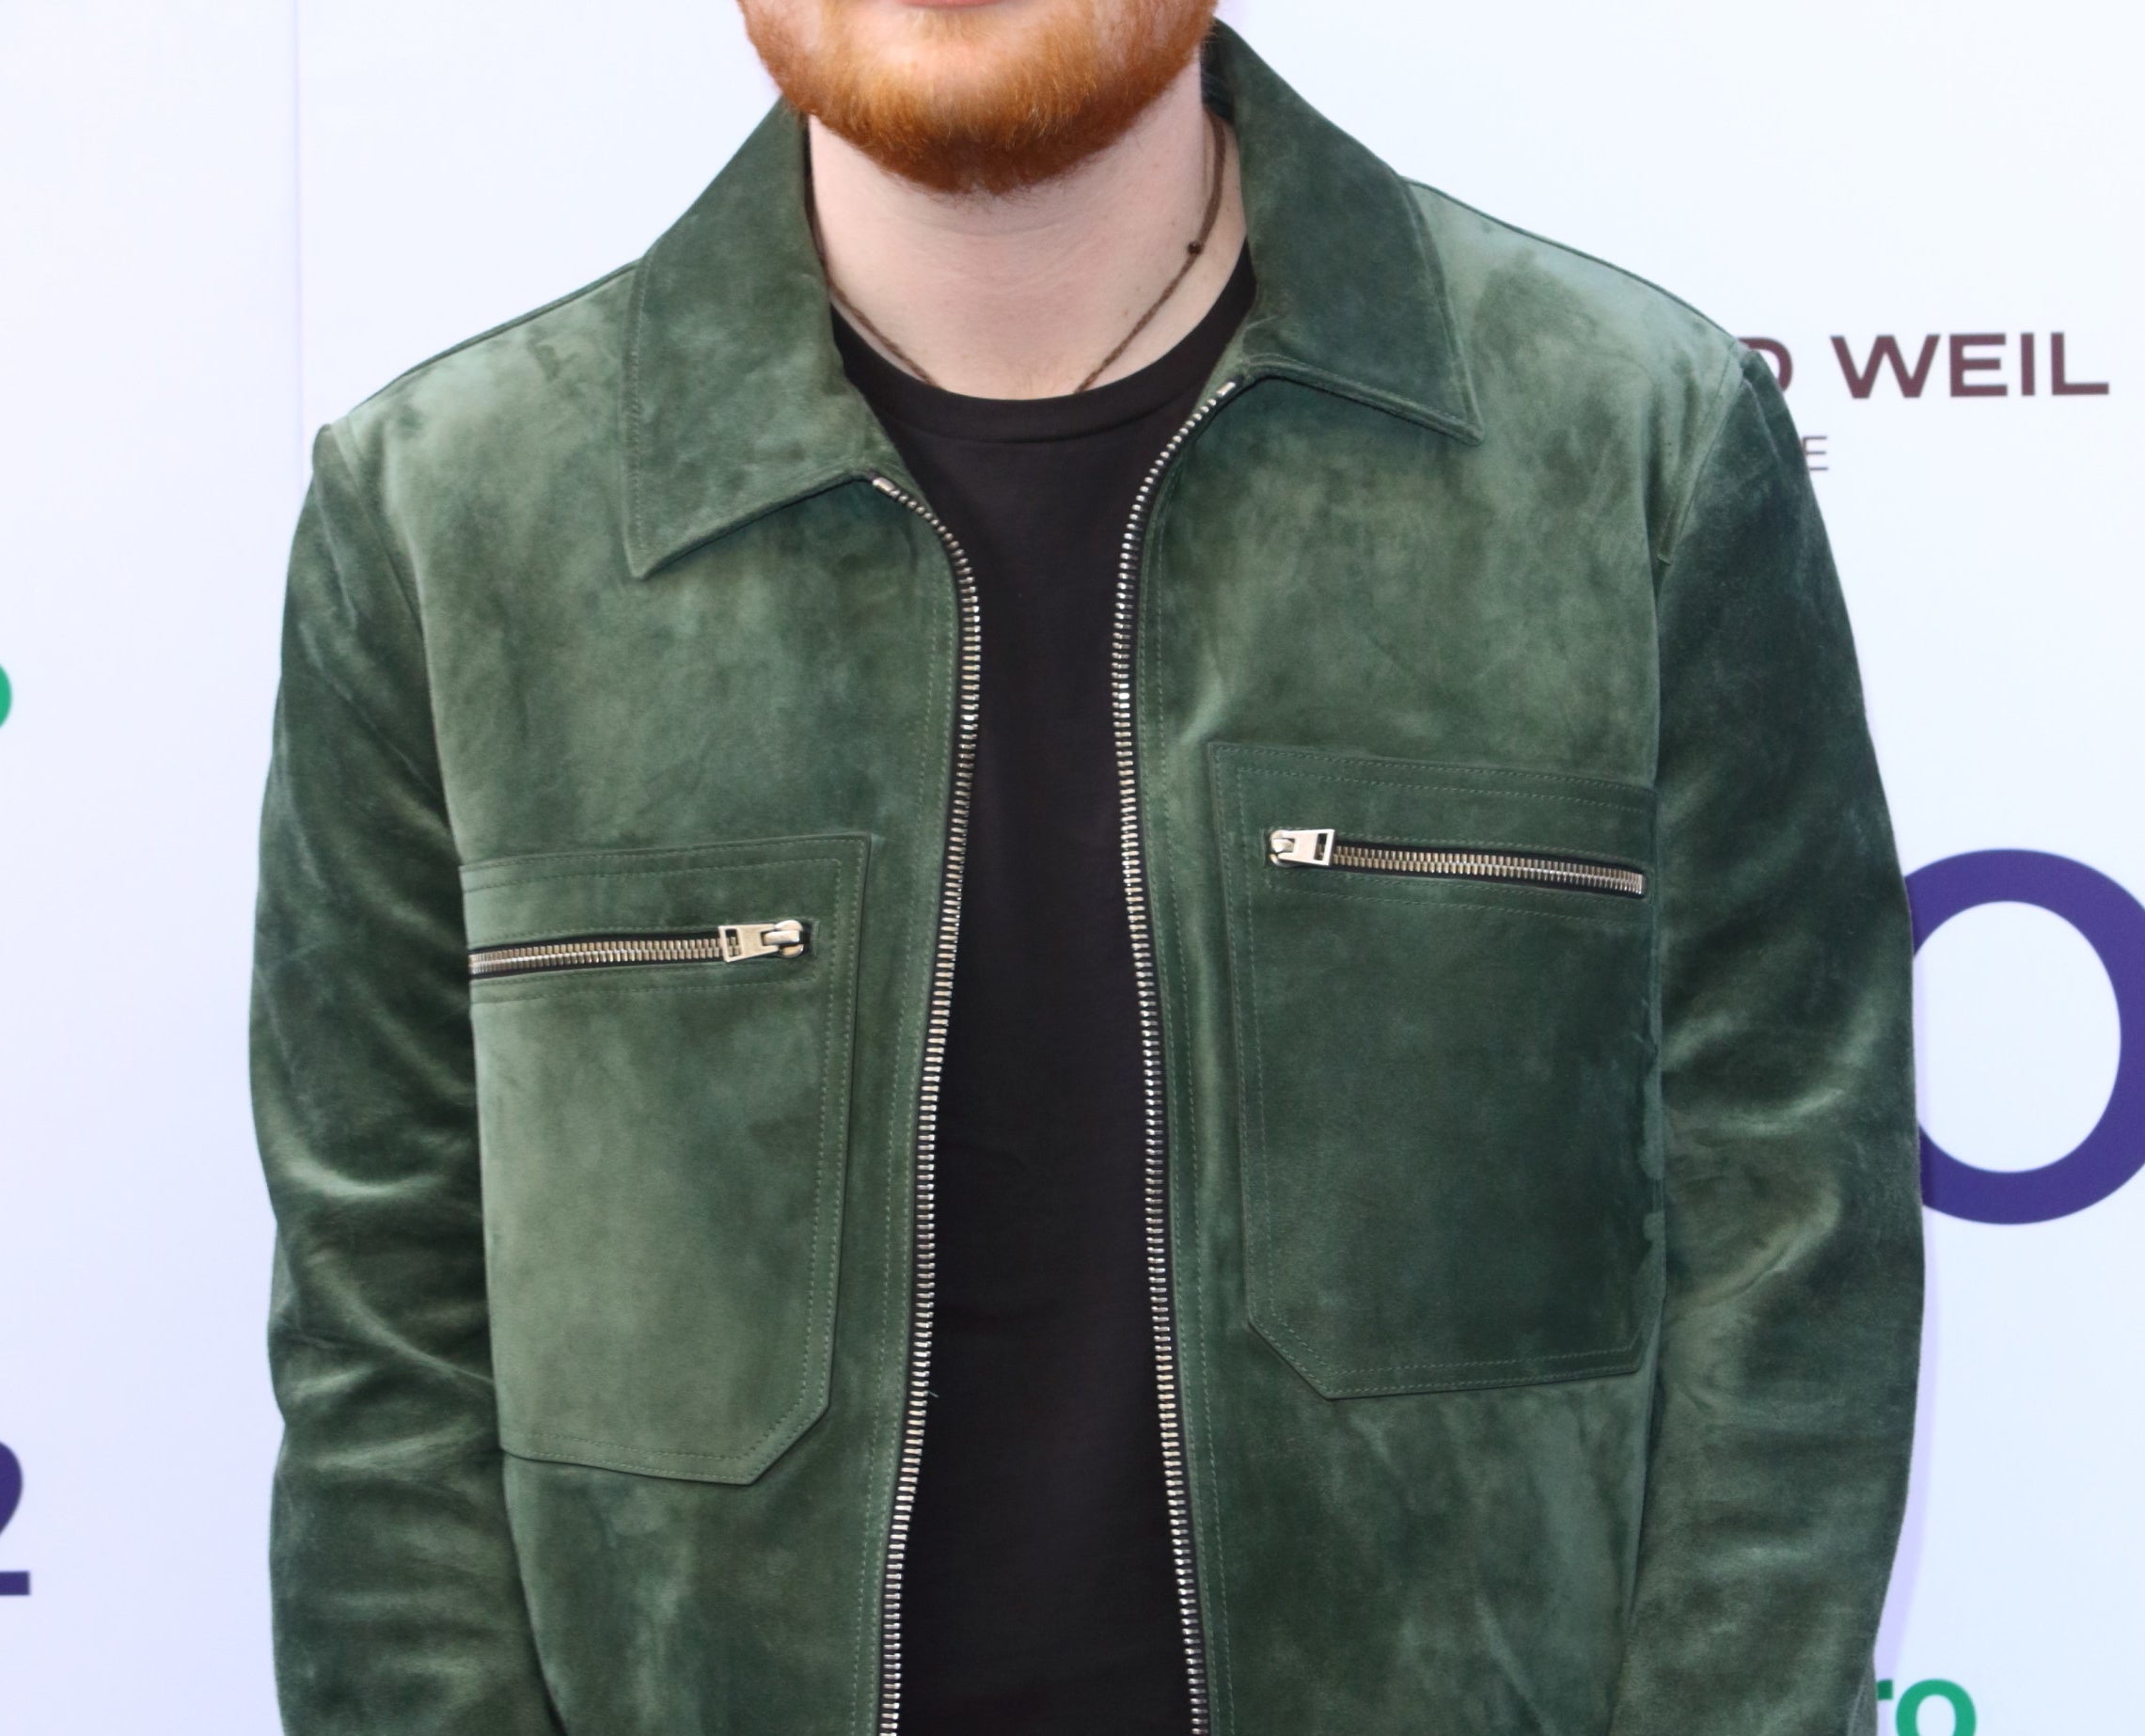 Ed wears a green suede jacket with pocket zippers to an award show